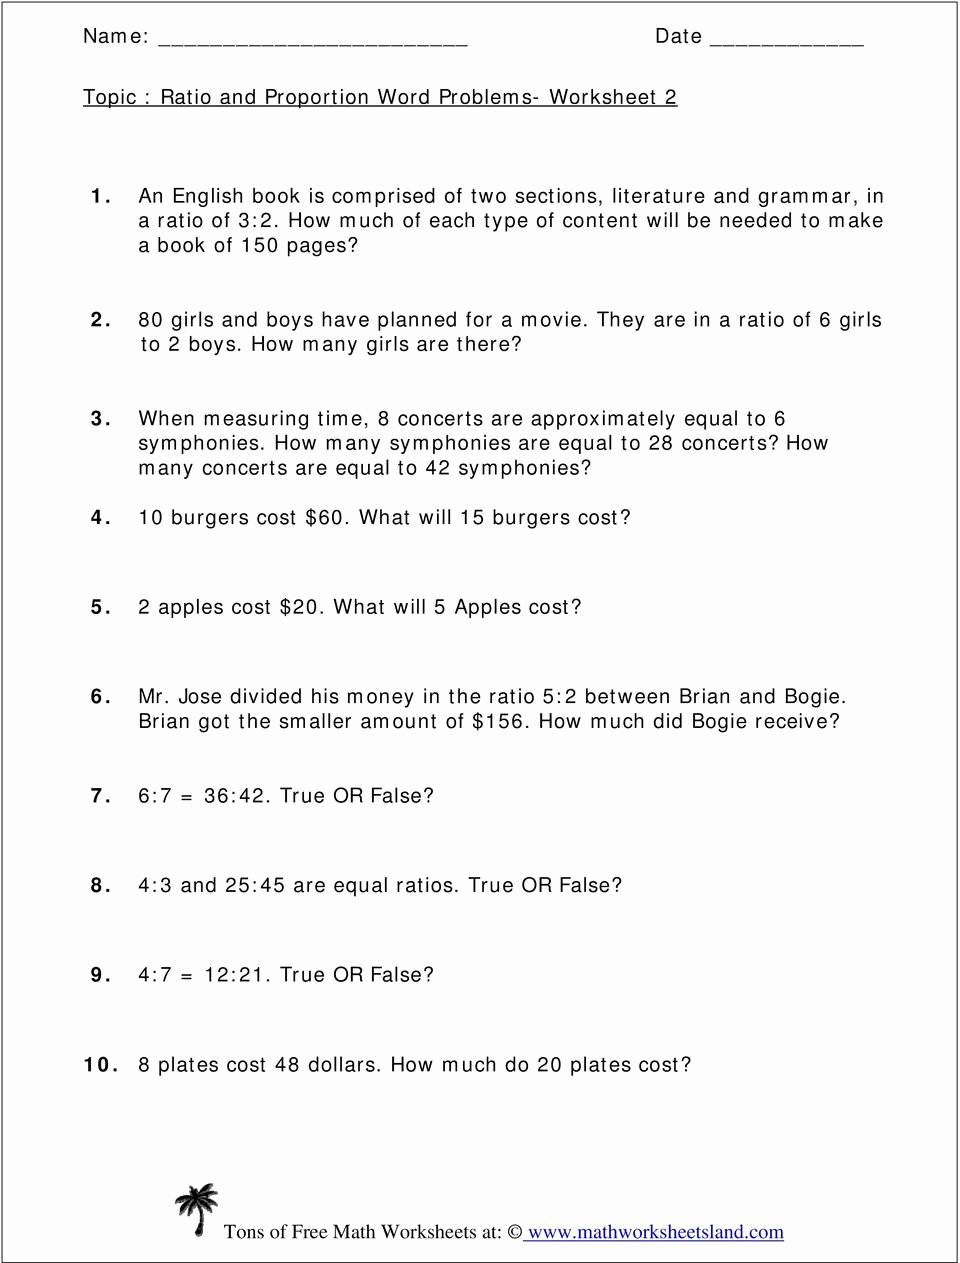 Proportion Word Problems Worksheet New topic Ratio and Proportion Word Problems Worksheet